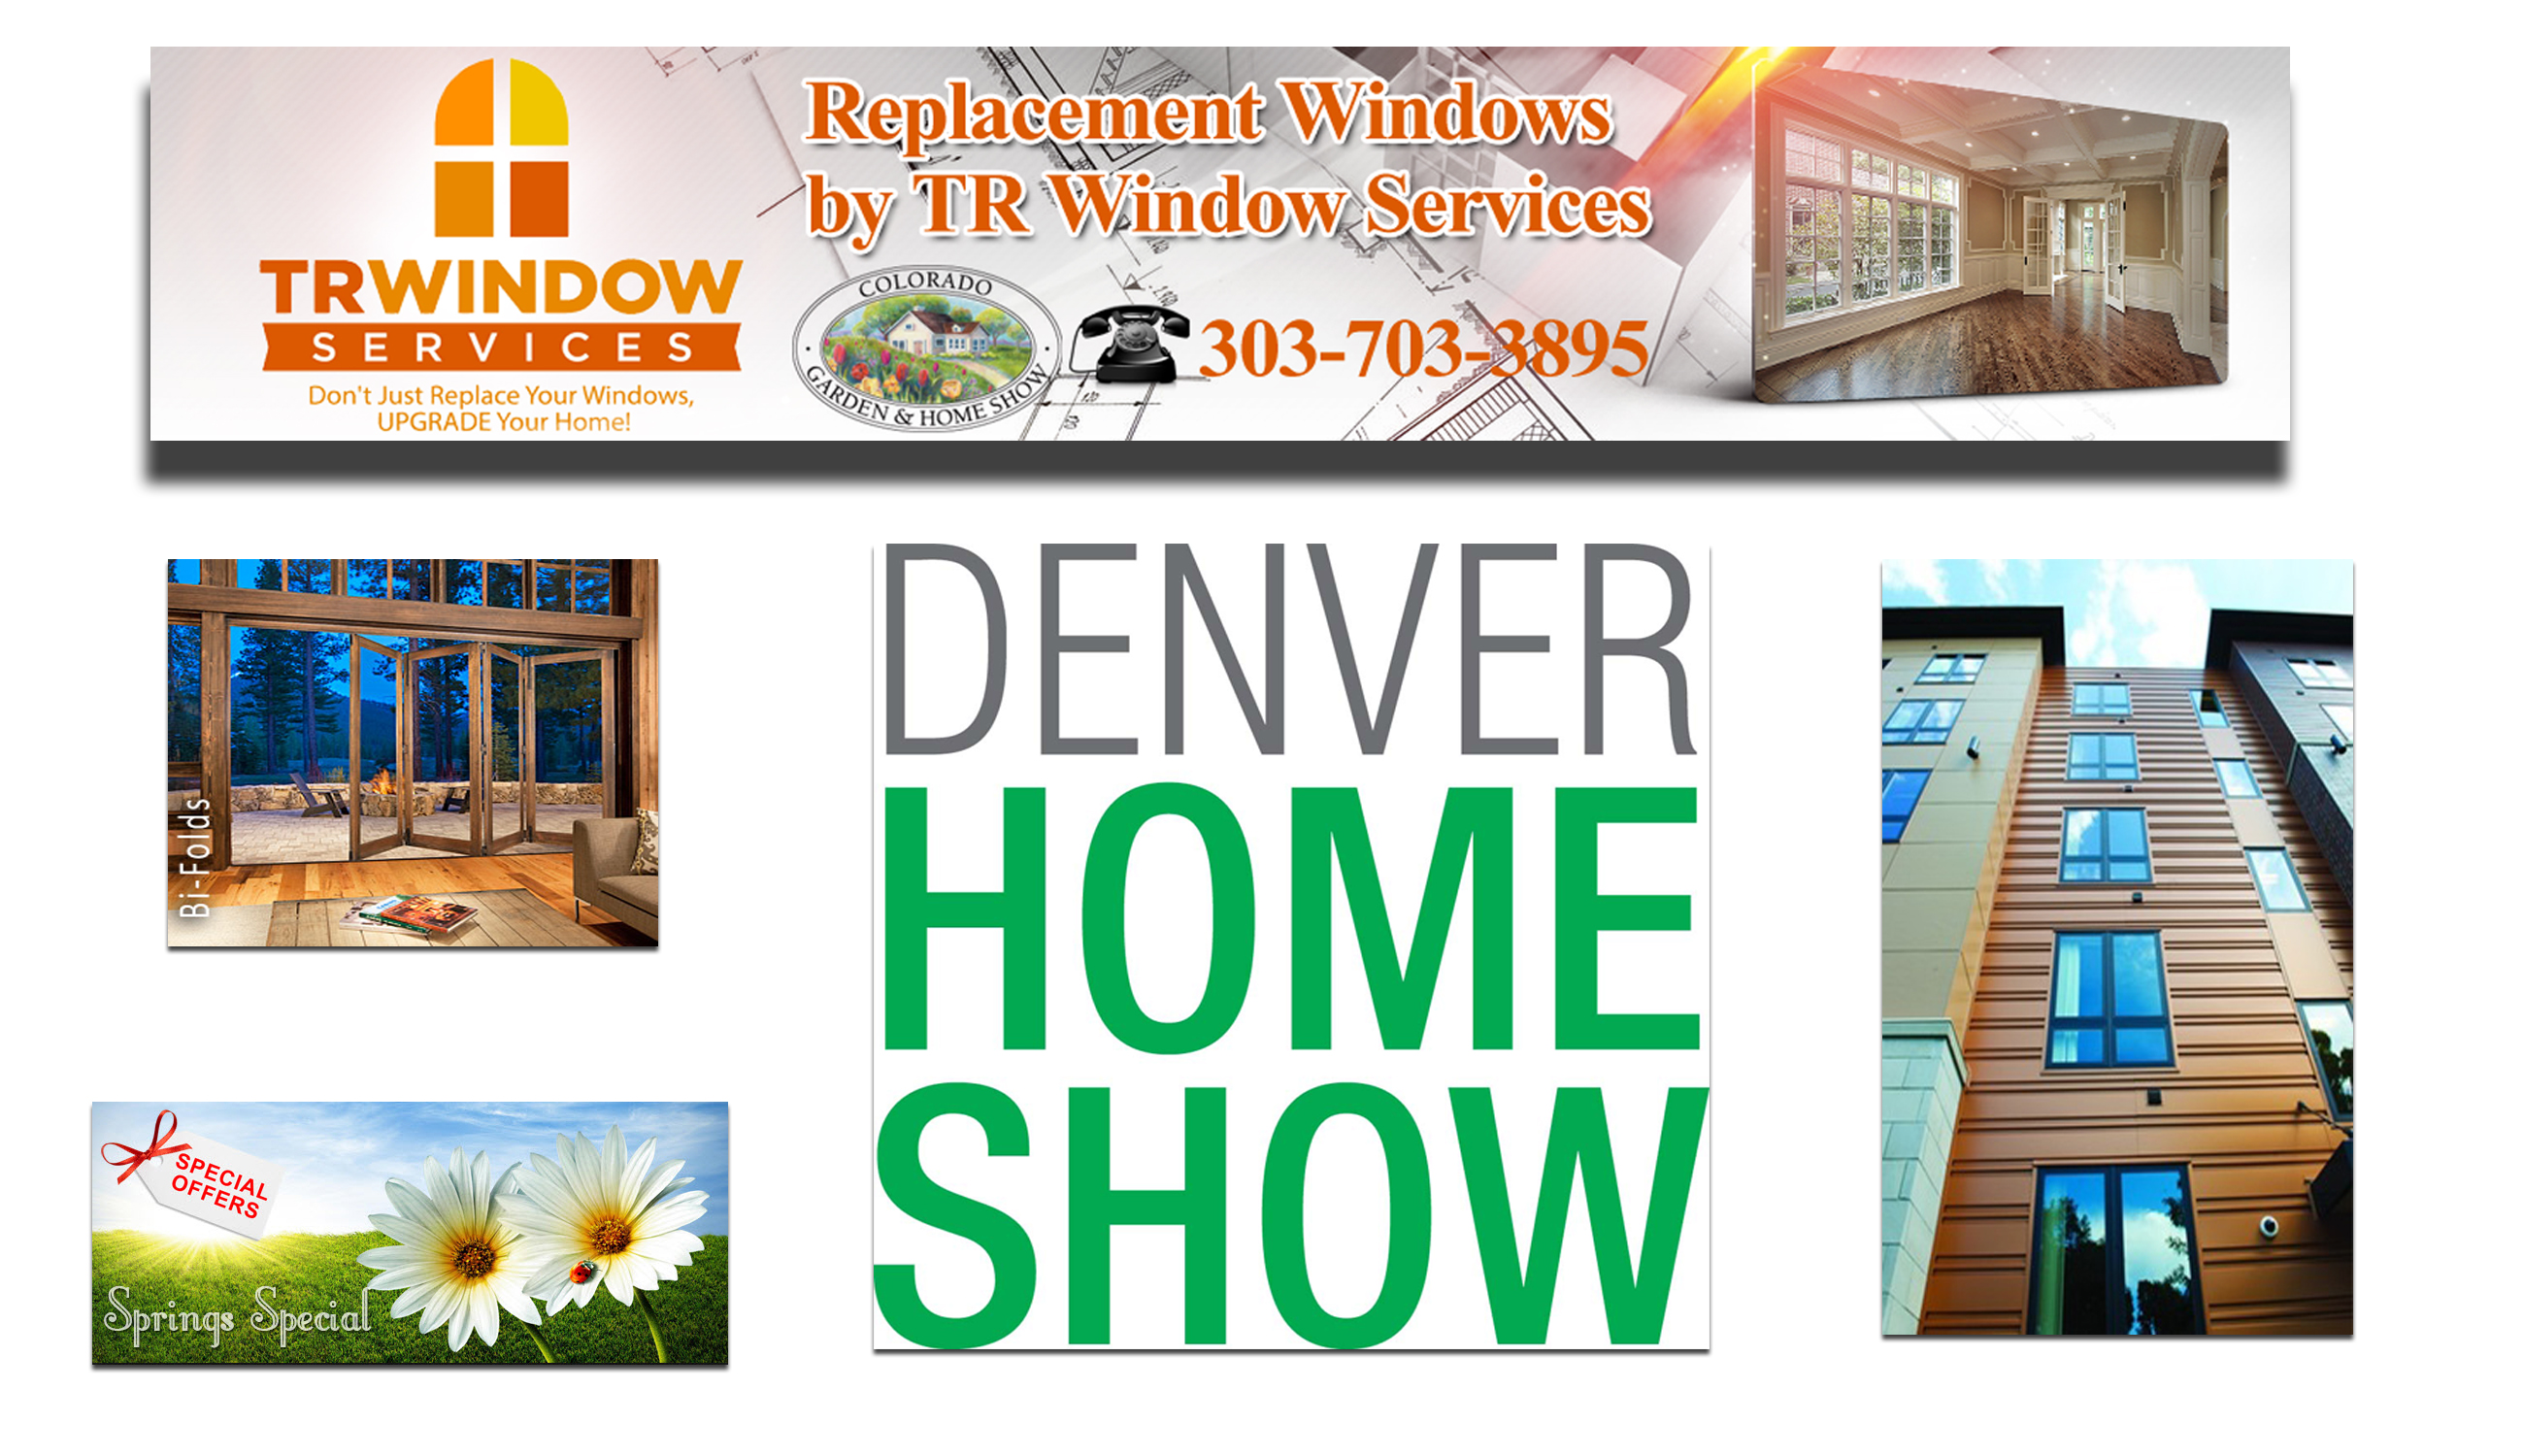 The Denver Home Show Starts Today!